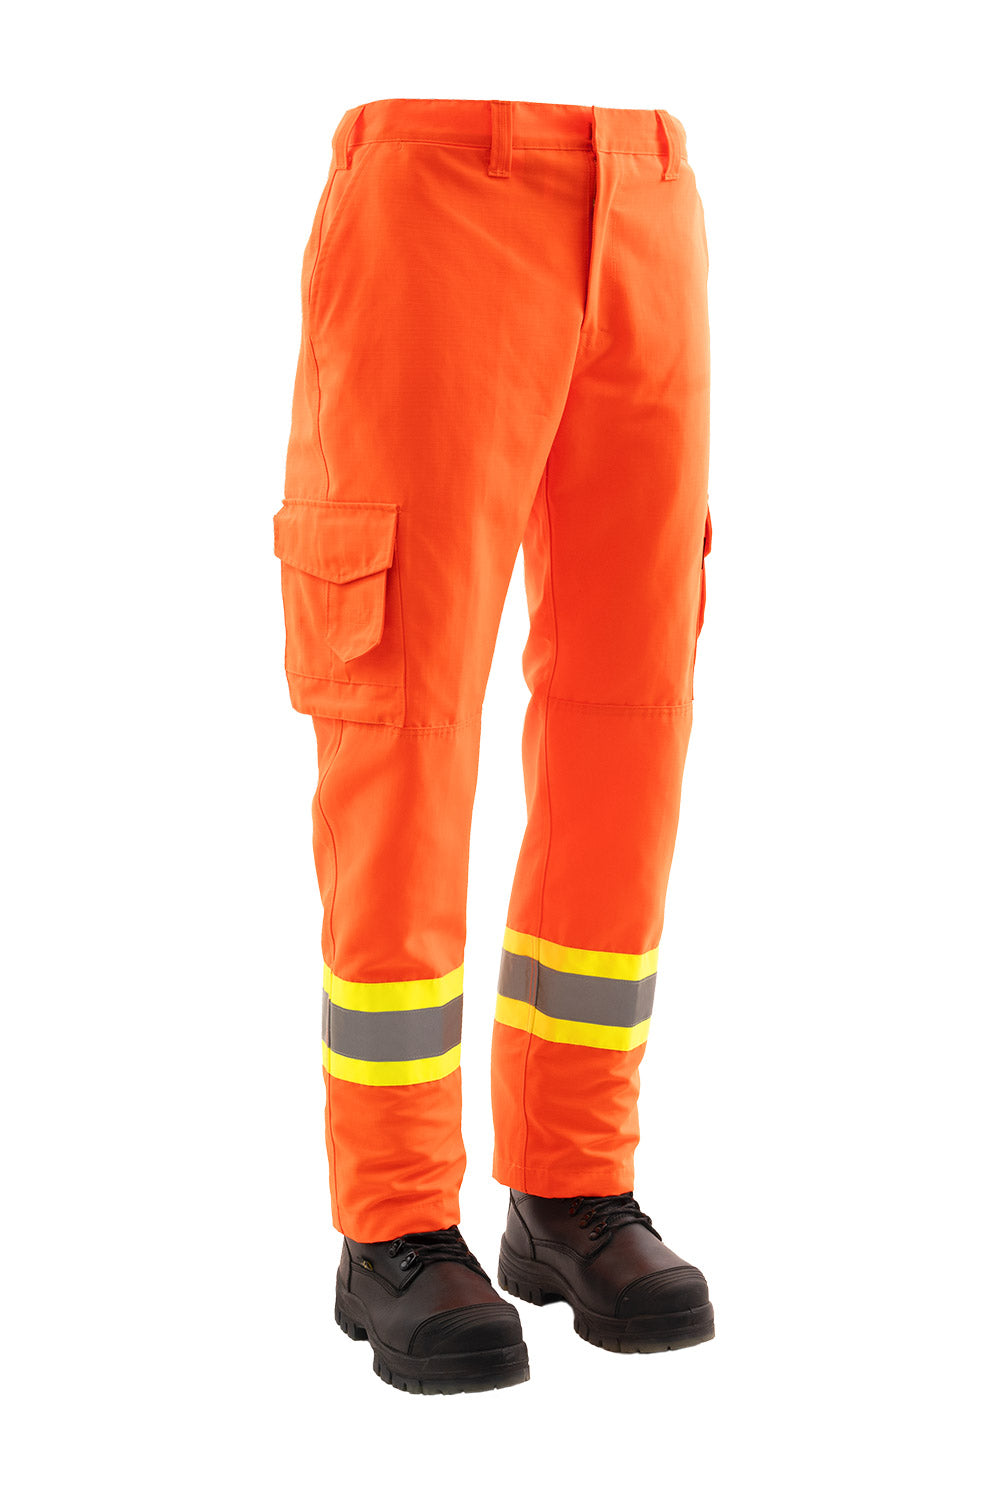 Source Durable oxford cotton cargo pants safety work men workwear trousers  on malibabacom